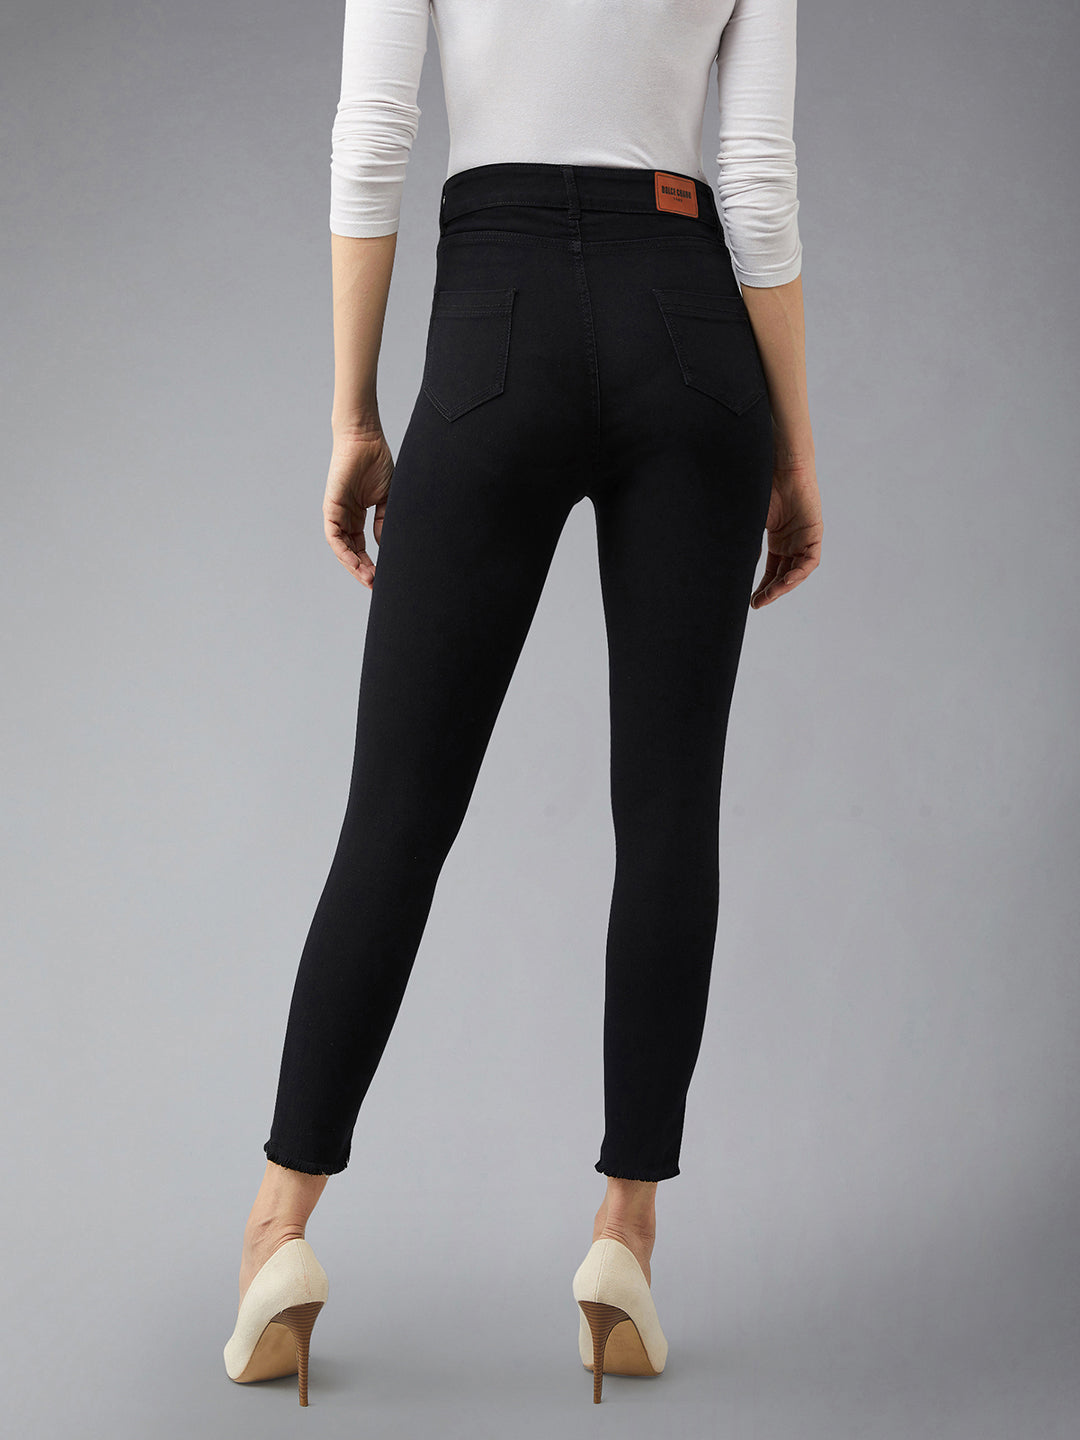 Women's Black Cotton Skinny Fit Cropped High Rise Stretchable Denim Jeans